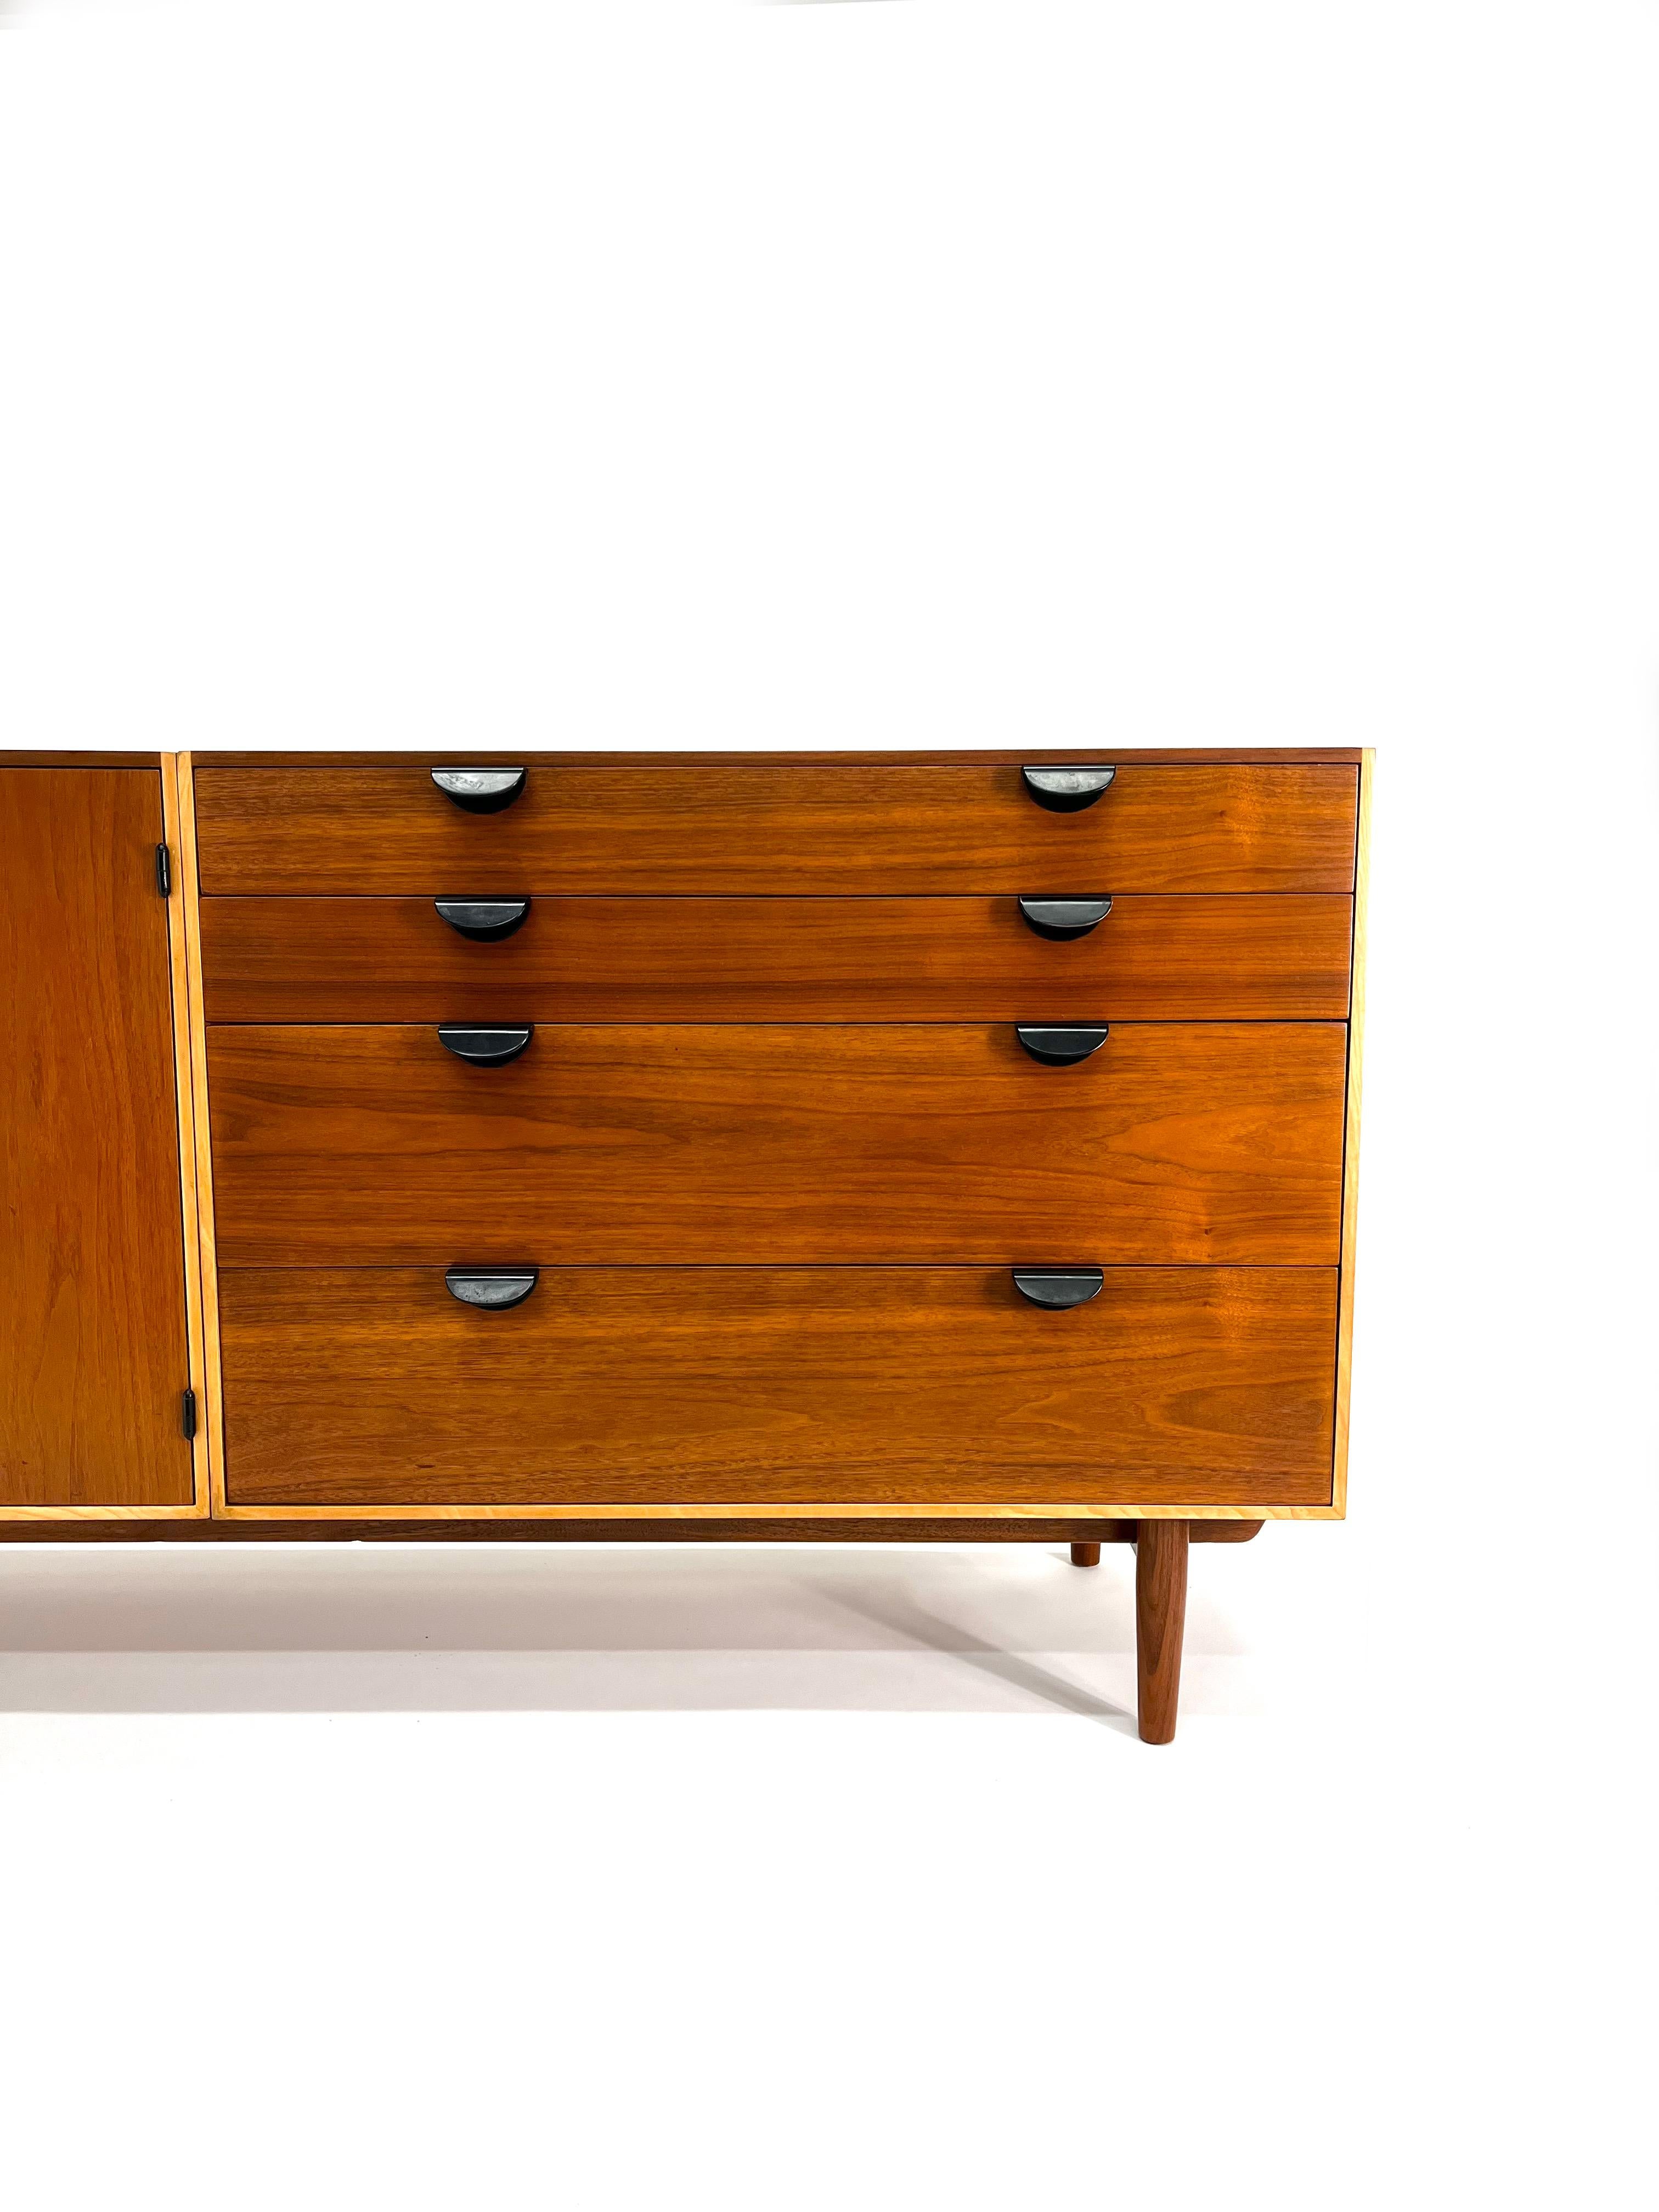 Finn Juhl Credenza For Baker In Excellent Condition For Sale In San Diego, CA